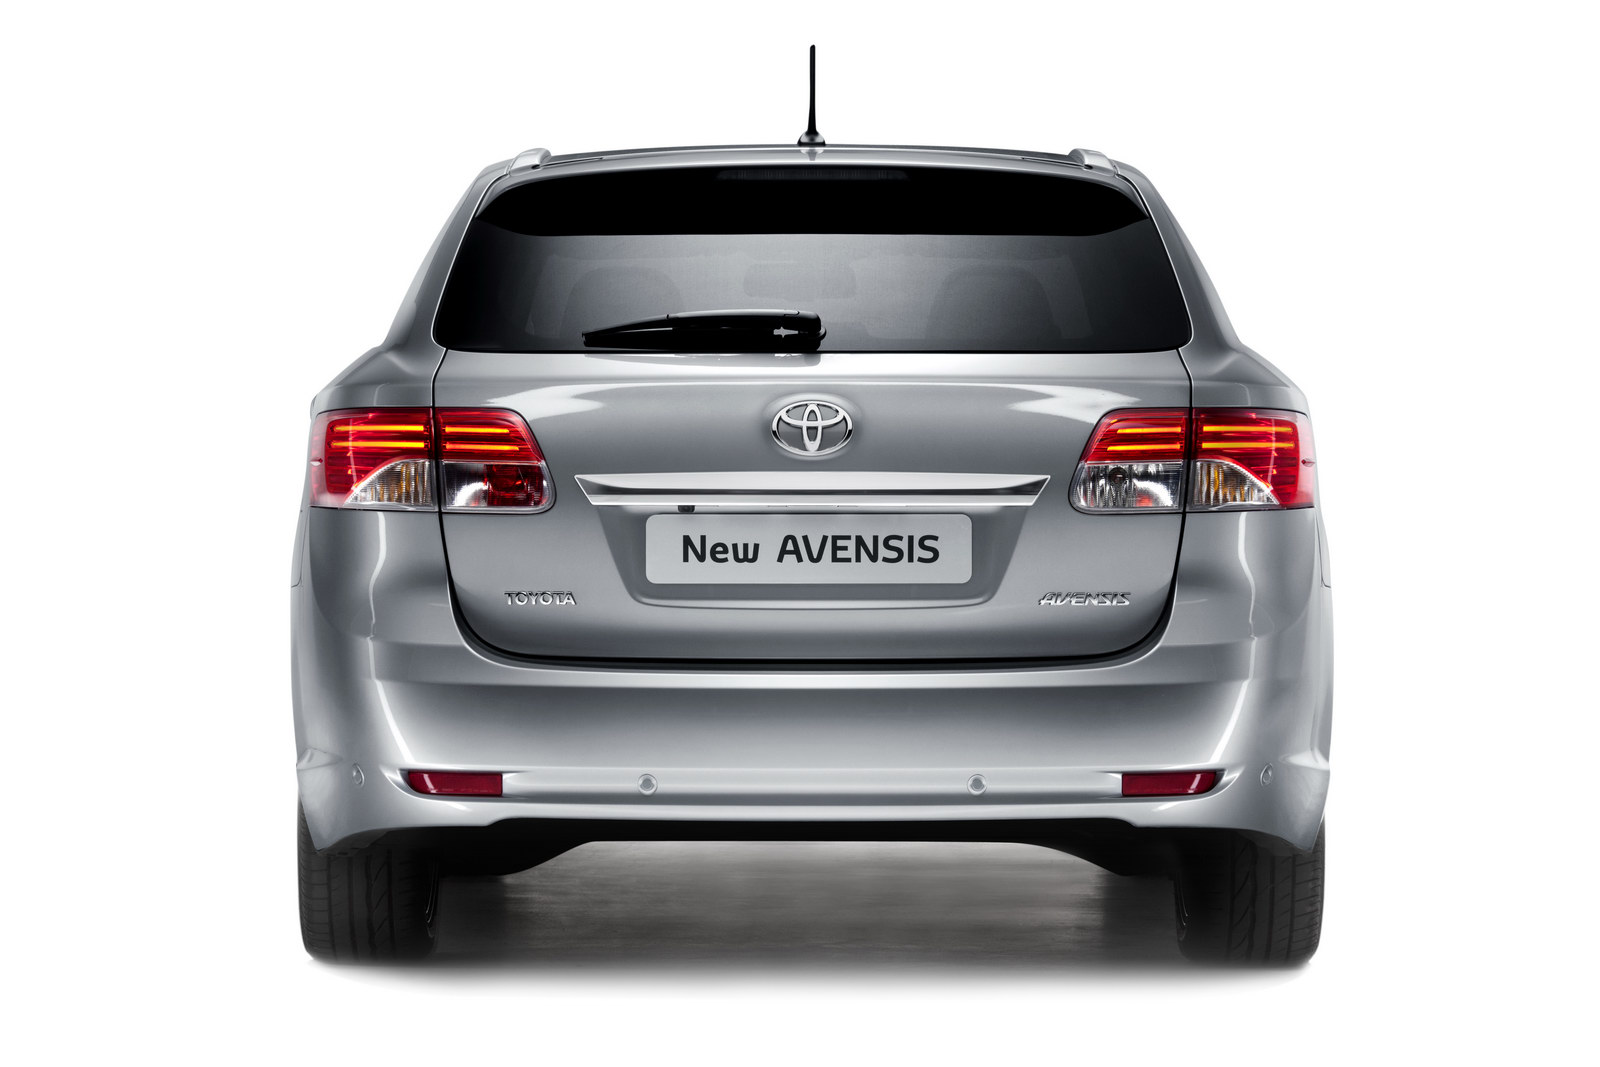 2012 Toyota Avensis Facelift Snagged Undisguised